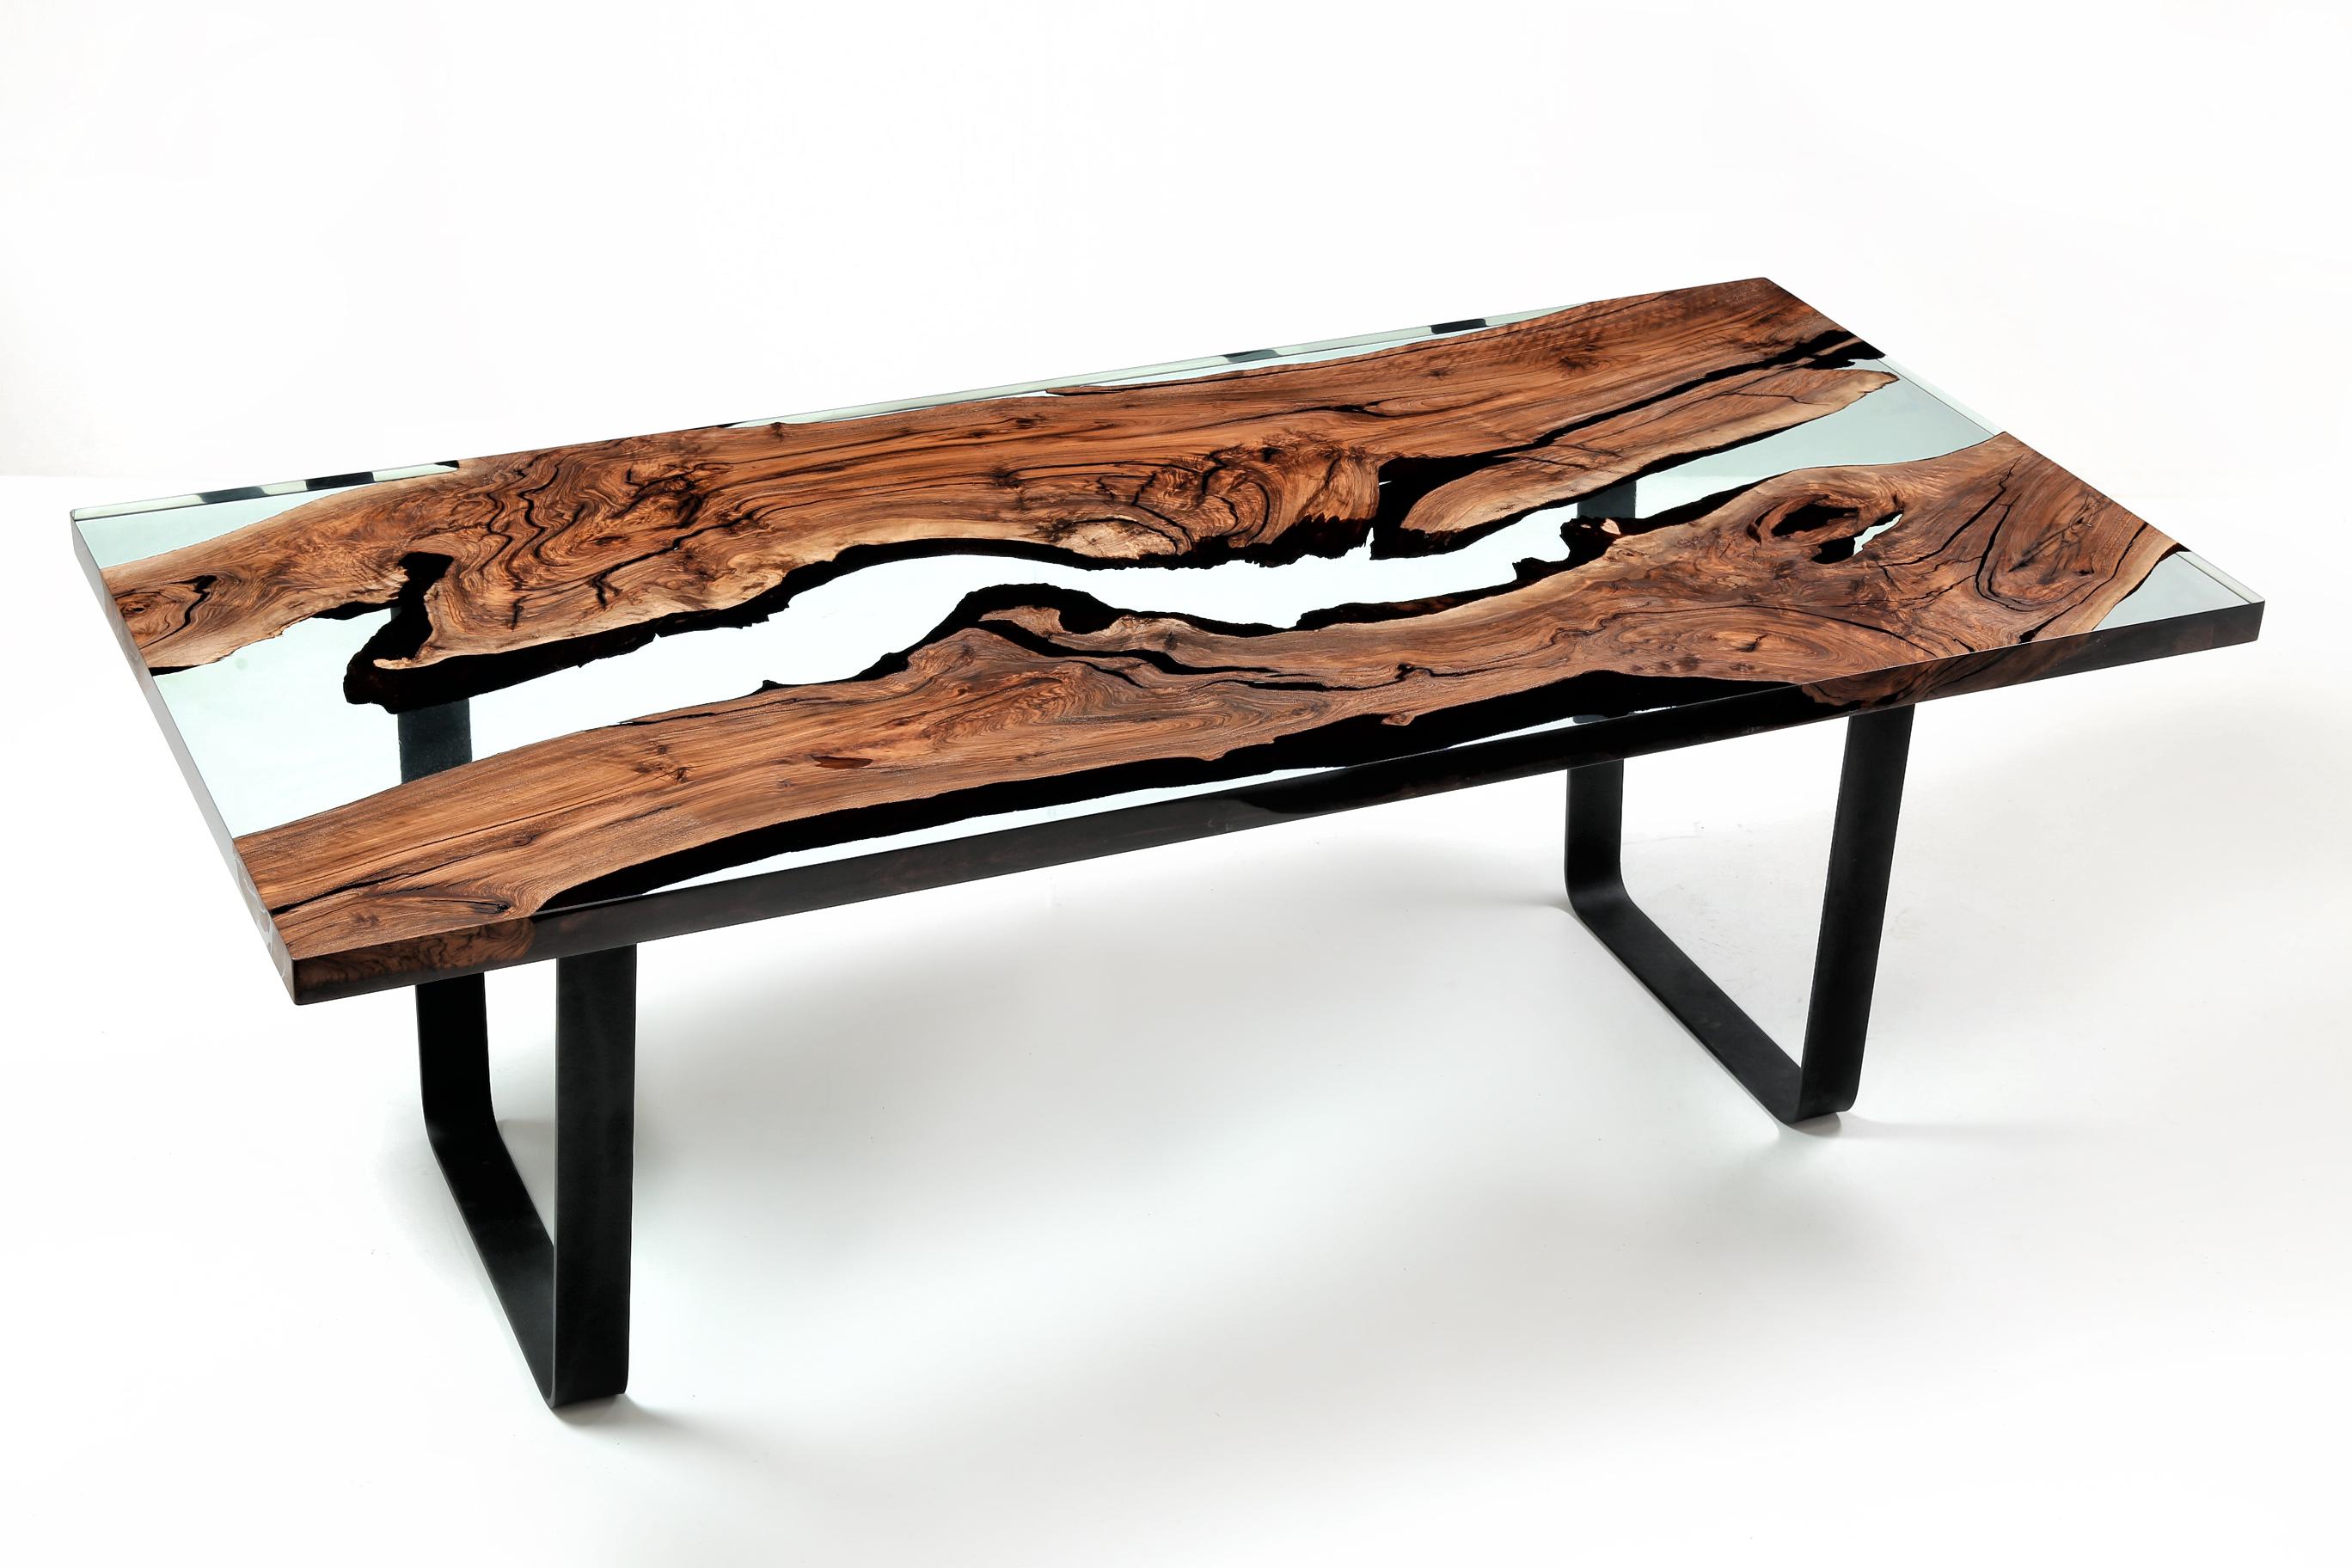 The Primitive 220 dining table integrates the finest wood from responsibly managed forests in Turkey with Naturalist’s perfected resin-pouring technique. This fusion of natural elements with modern materials is at the heart of Naturalist’s work, and